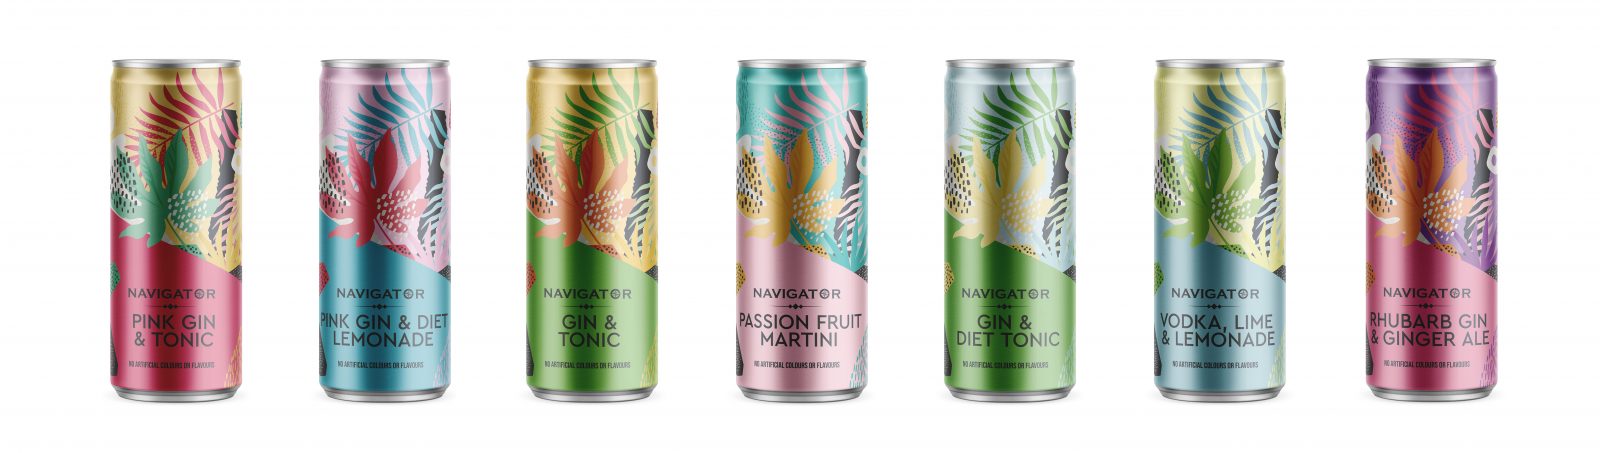 Manchester Drinks has launched summer cocktail multipack cans, The Manc